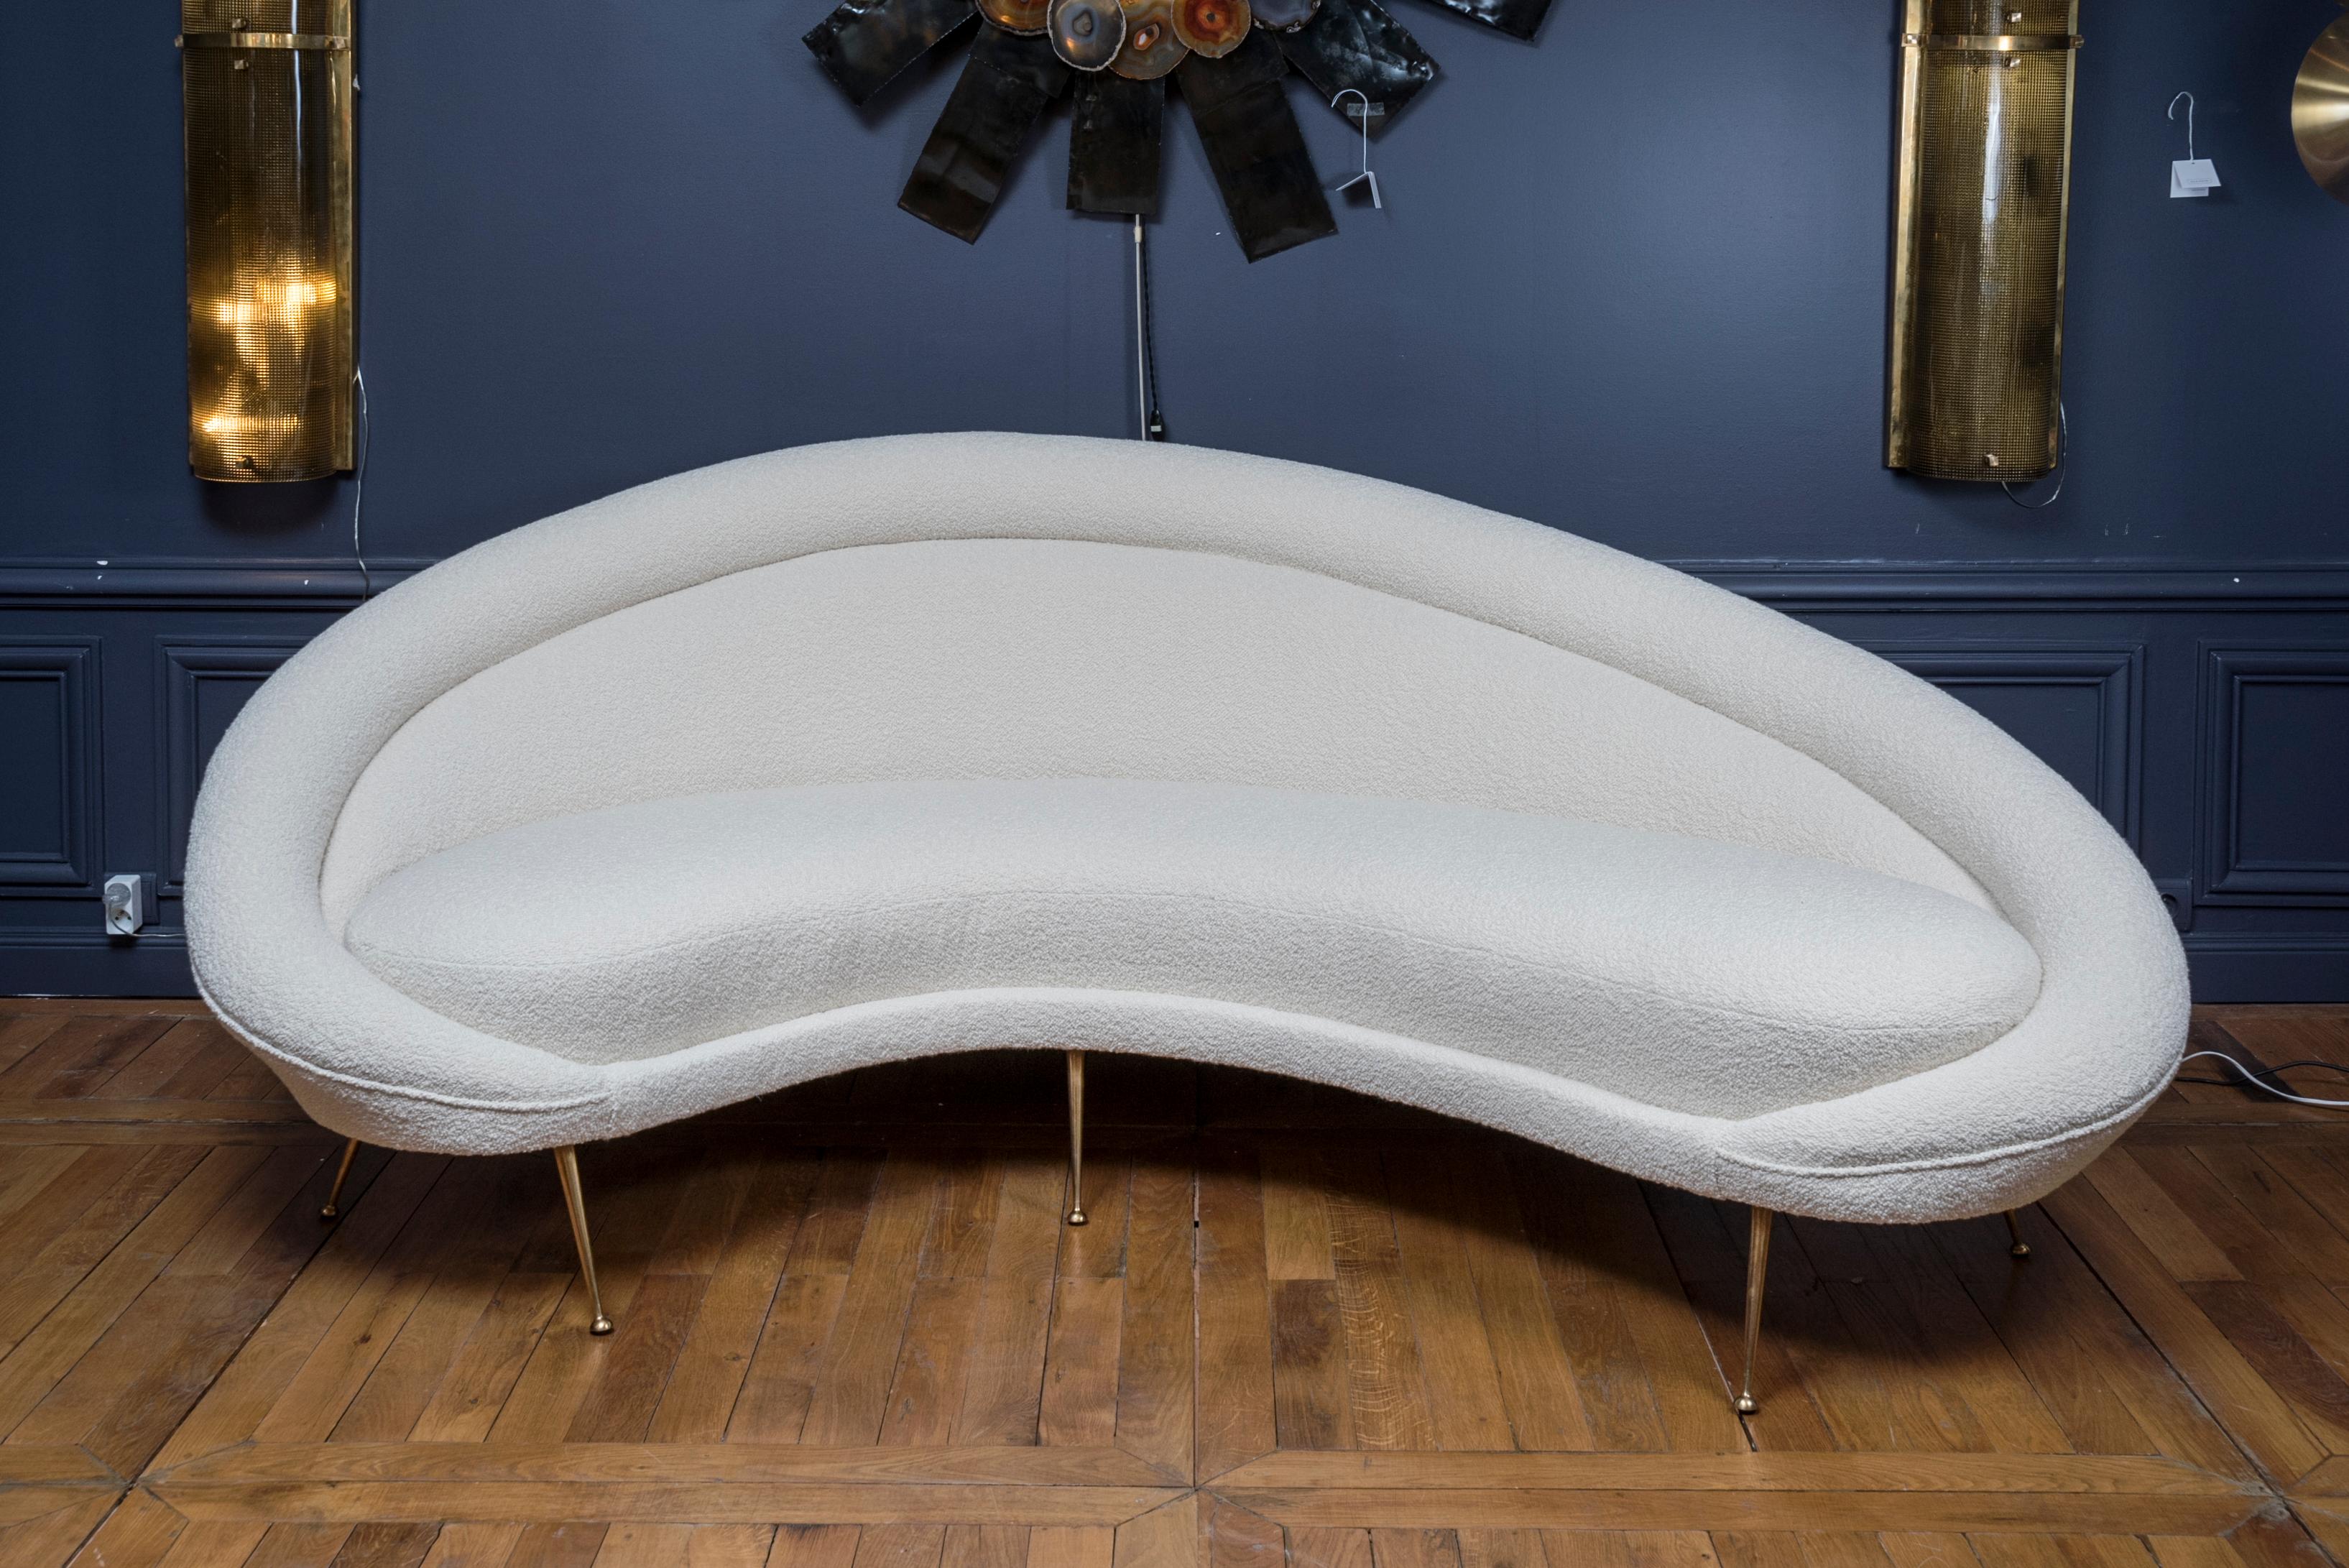 This sofa designed by the Studio Glustin is a modern creation. It is upholstered with Dedar Bouclette fabric here, but any fabric can be used by order. Price in com: 7,560 €.